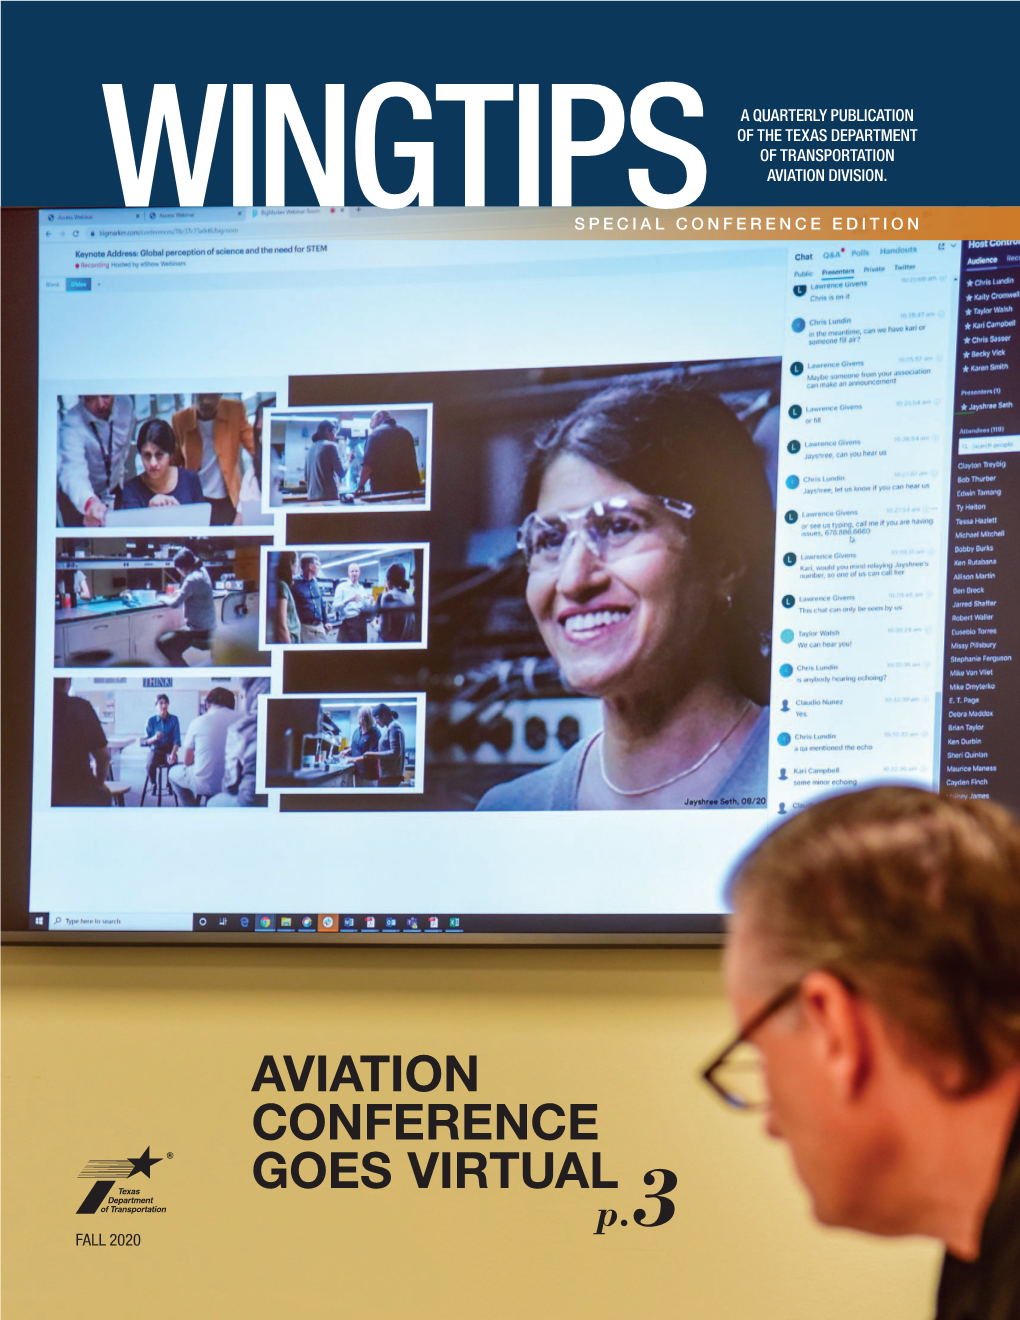 AVIATION CONFERENCE GOES VIRTUAL P.3 FALL 2020